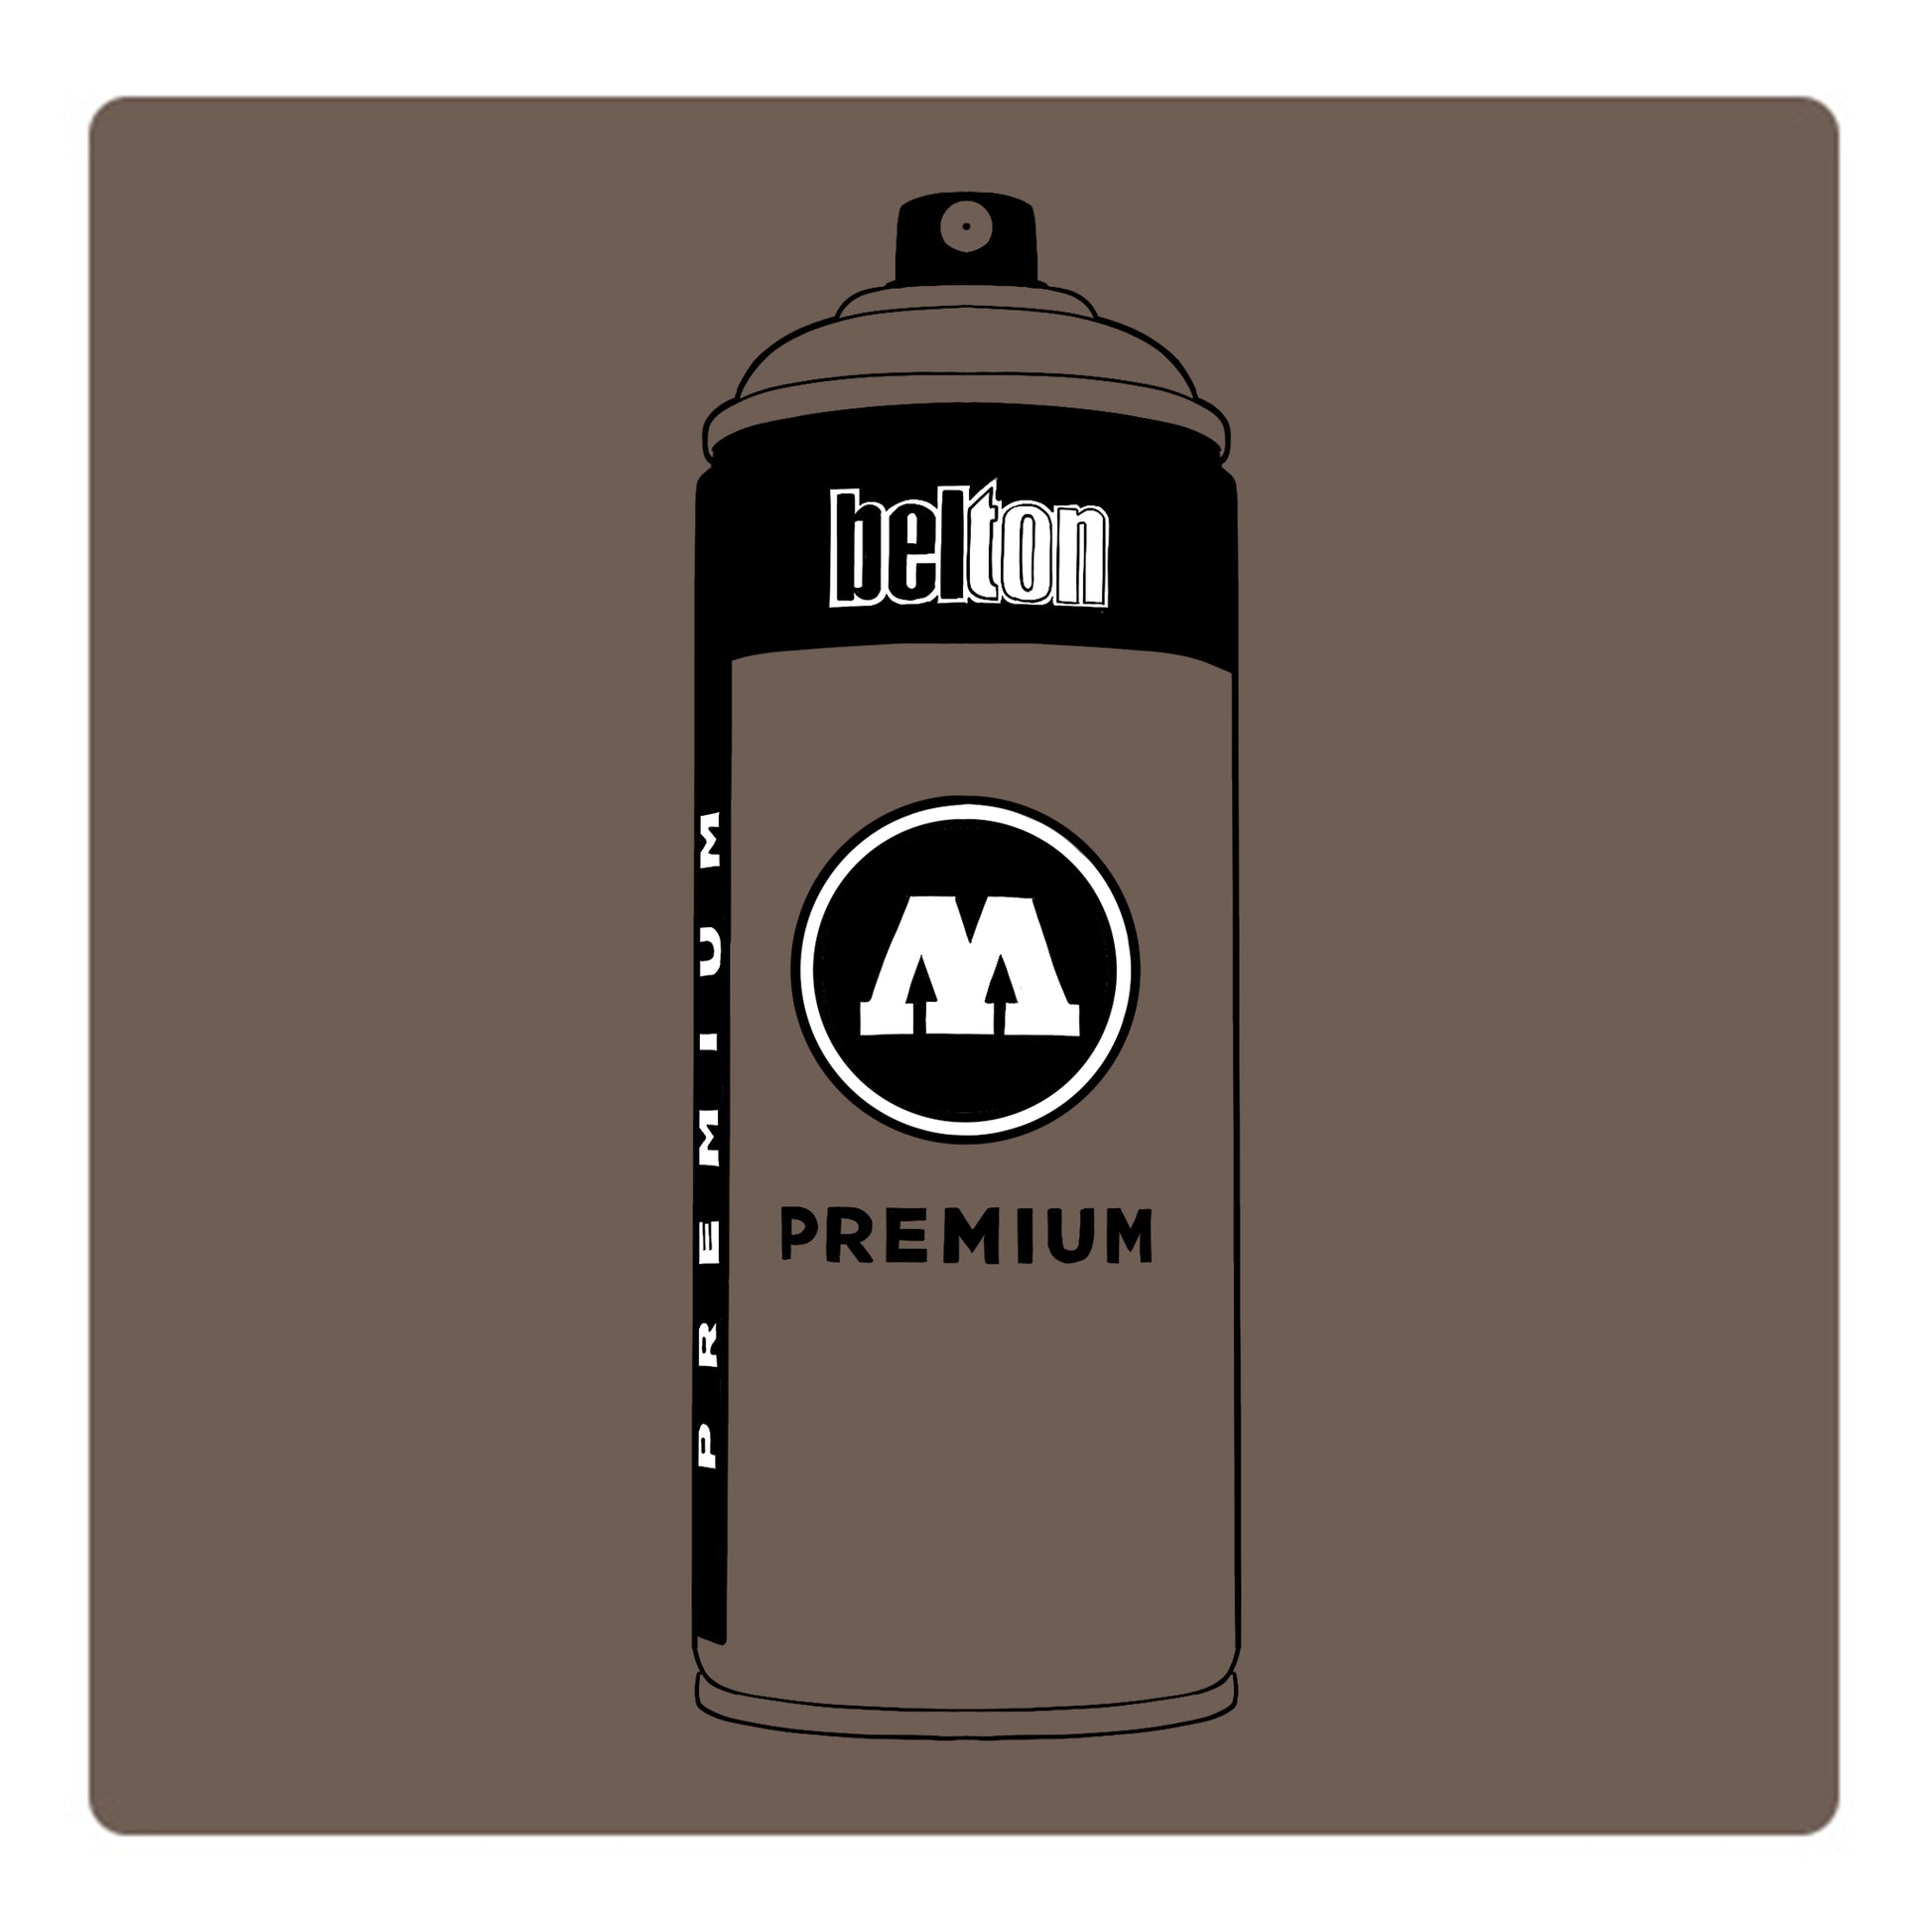 A black outline drawing of a greyish brown spray paint can with the words "belton","premium" and the letter"M" written on the face in black and white font. The background is a color swatch of the same greyish brown with a white border